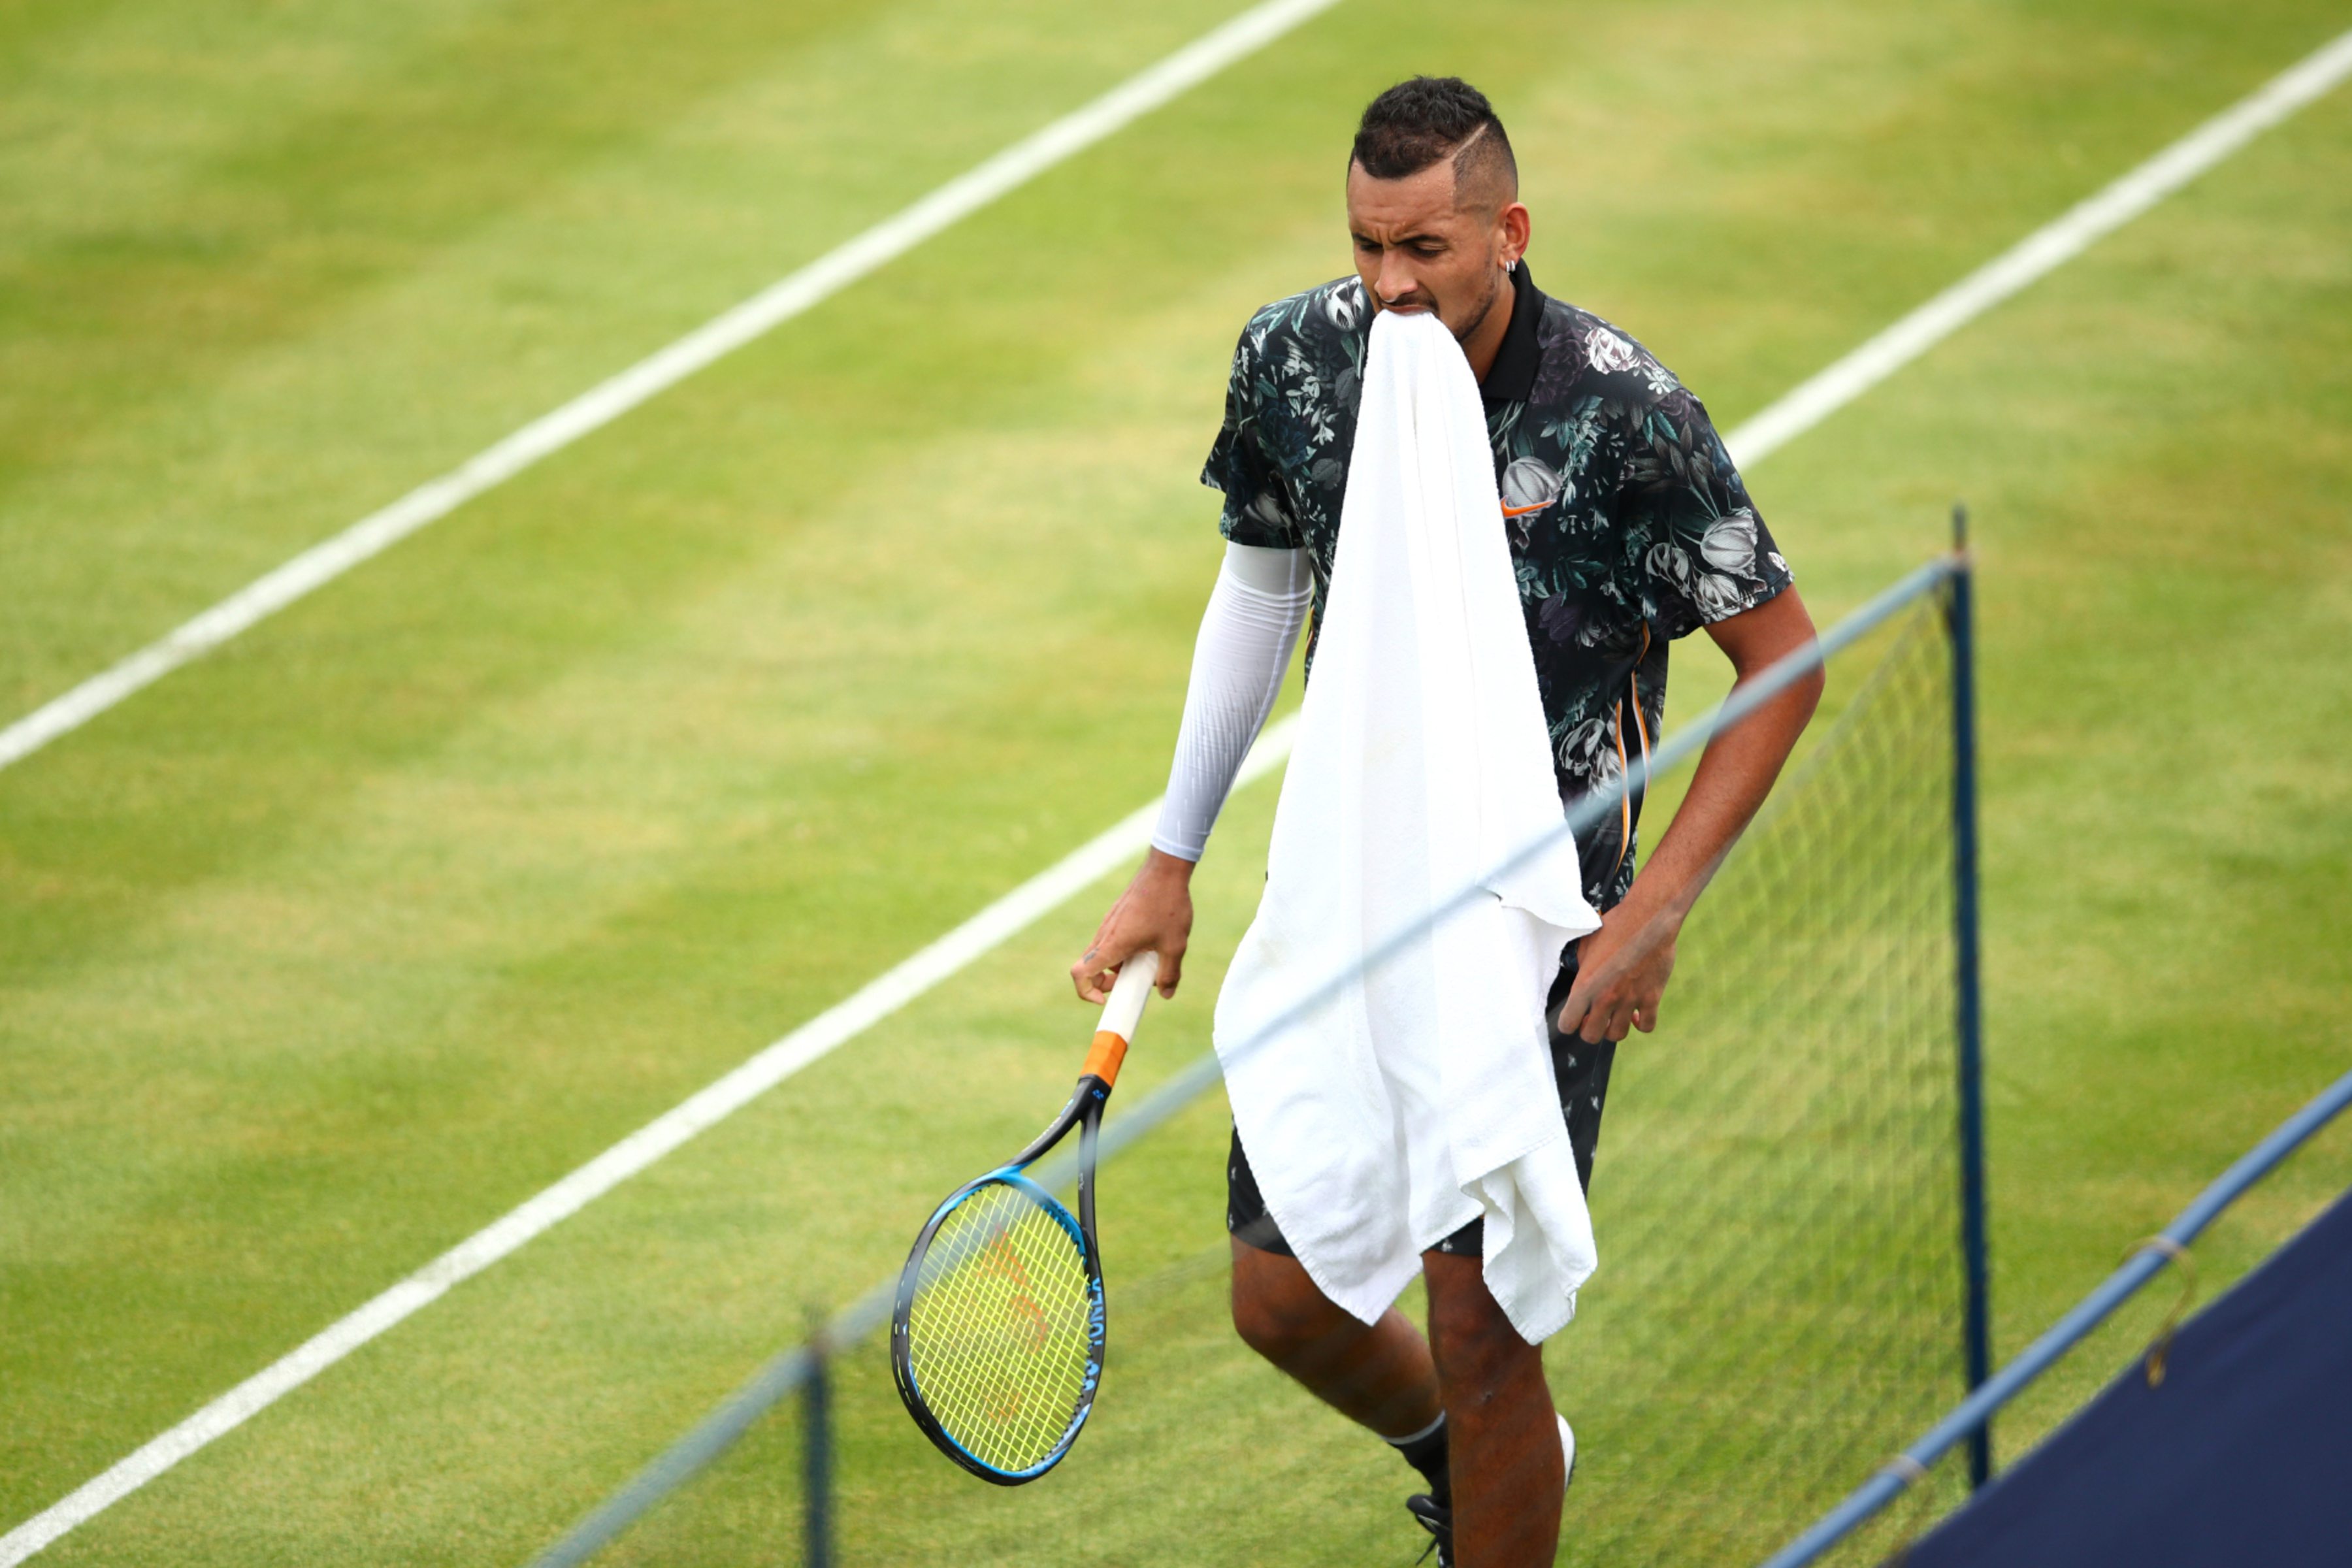 LONDON, ENGLAND - JUNE 20: Nick Kyrgios of Australia reacts during his First Round Singles Match against Roberto Carballes Baena of Spain during day Four of the Fever-Tree Championships at Queens Club on June 20, 2019 in London, United Kingdom. (Photo by Clive Brunskill/Getty Images)